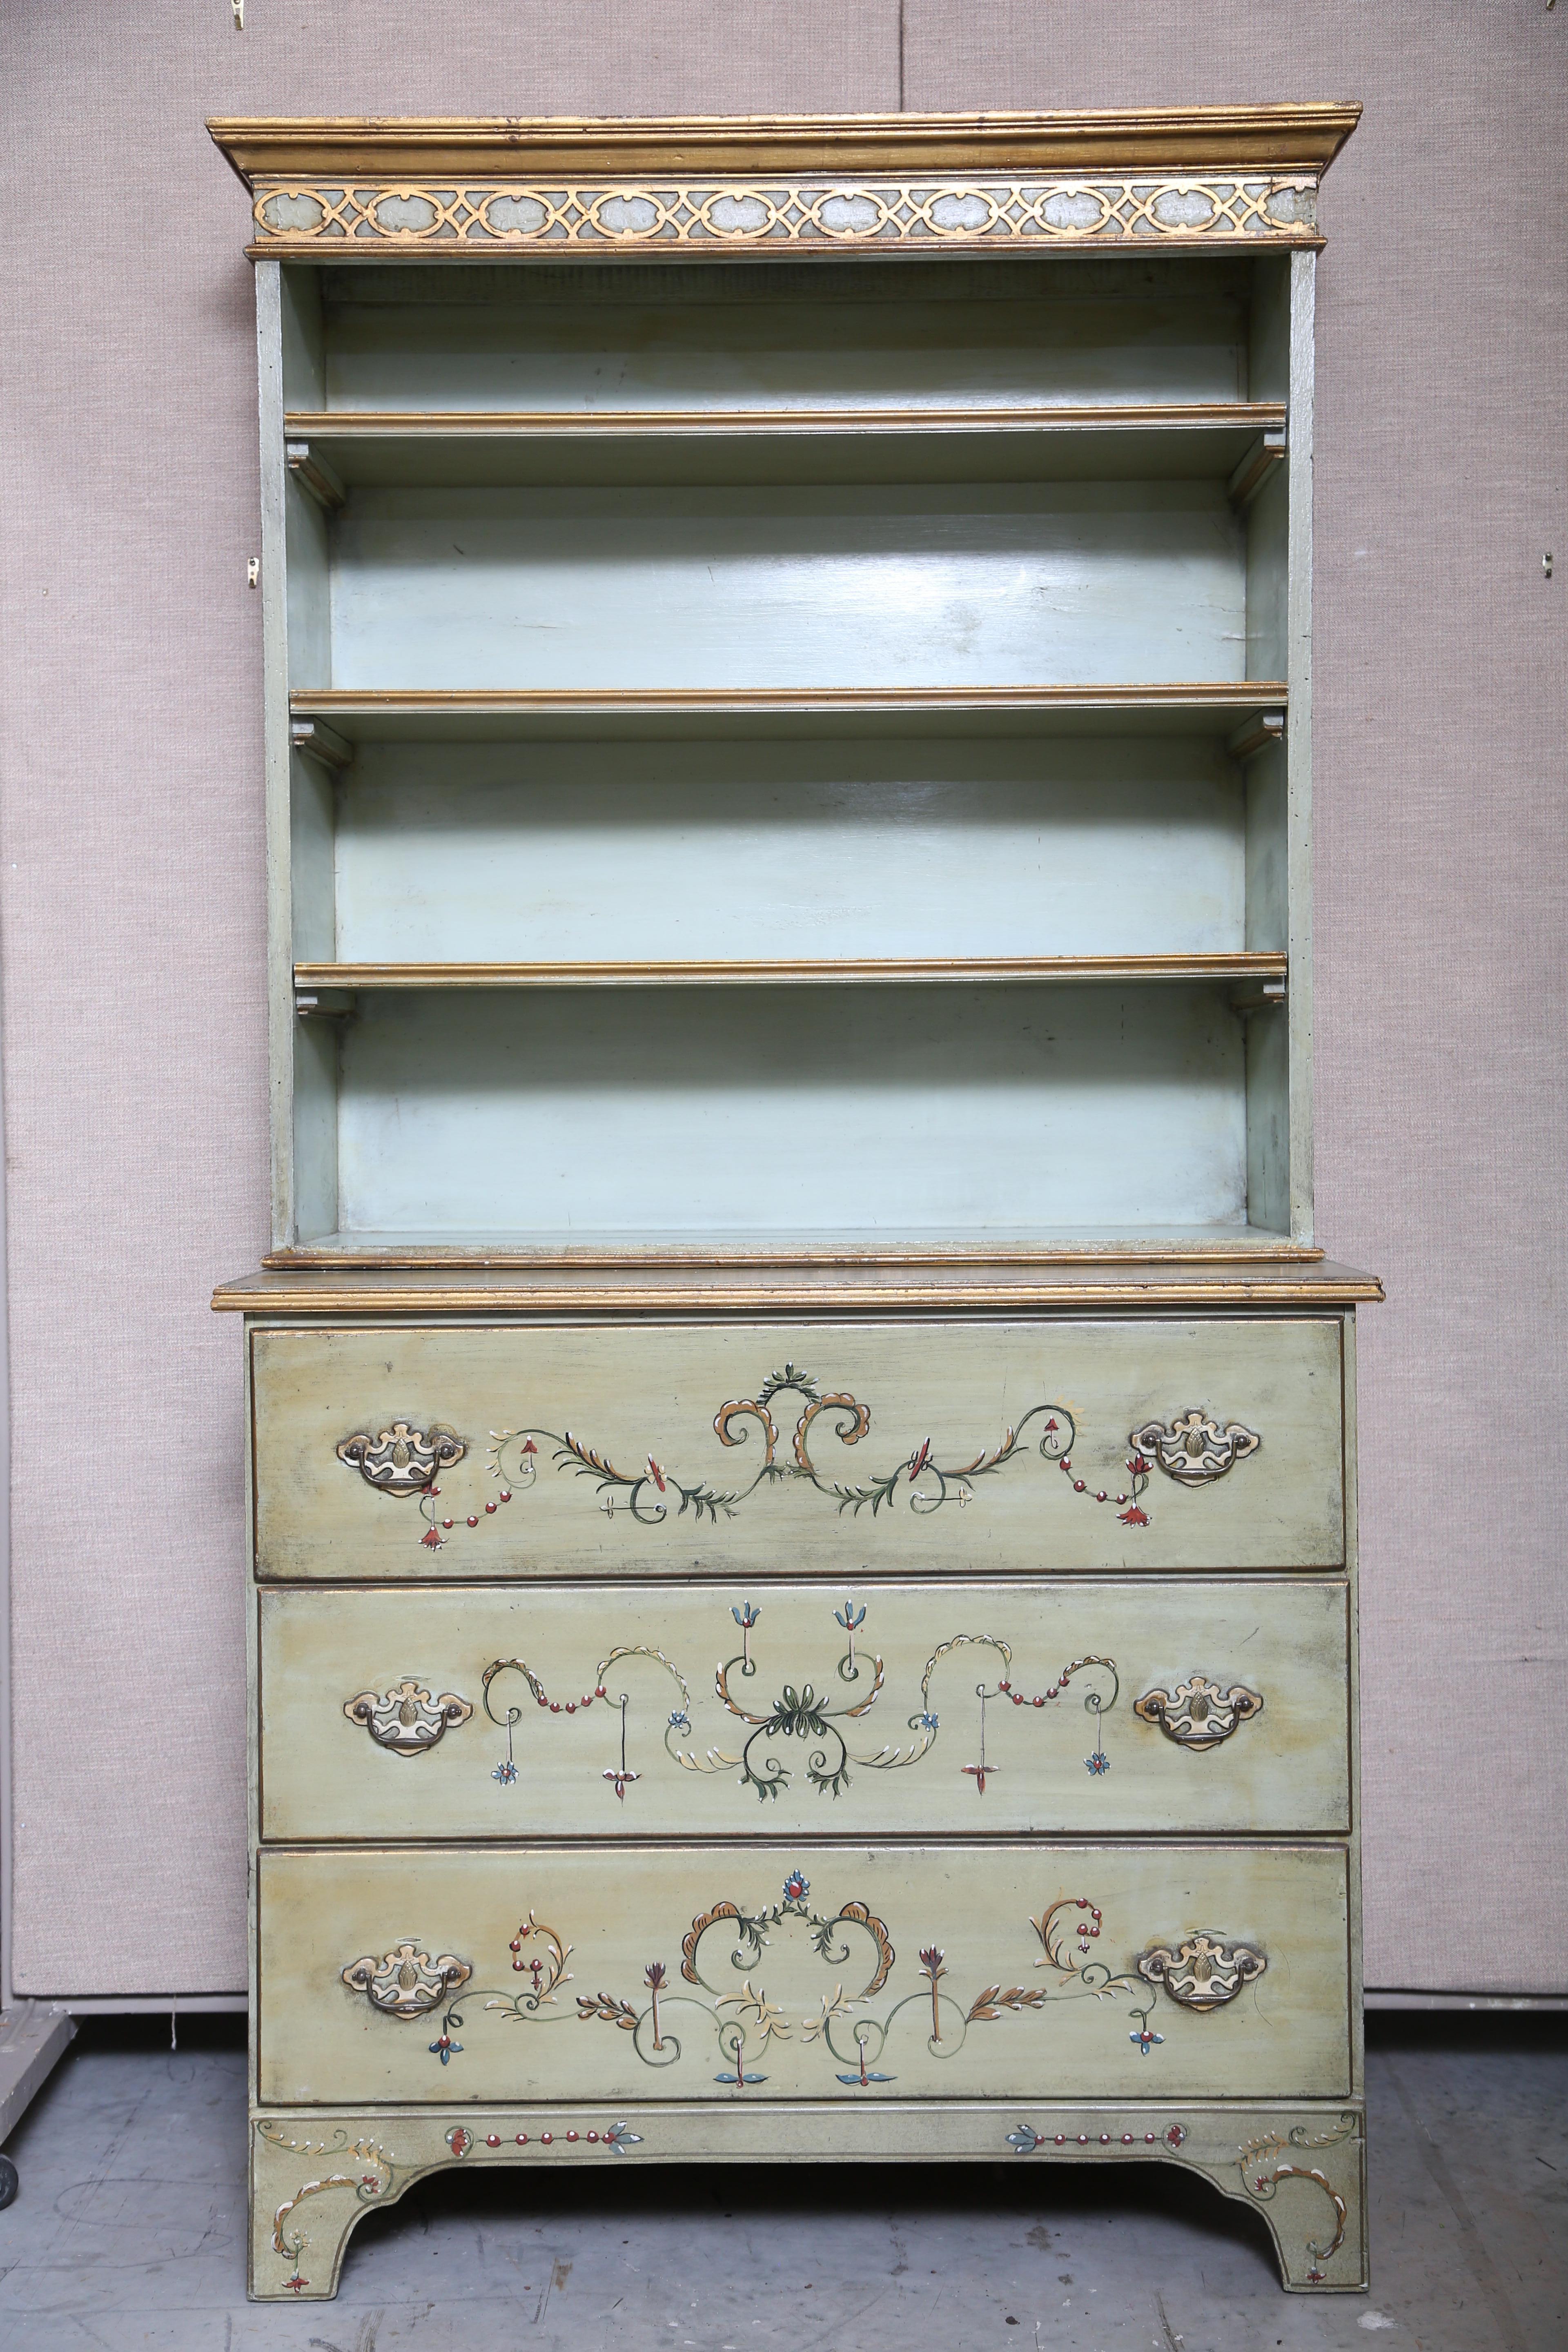 Painted two part  bureau bookcase having three removable shelves. The chest has three spacious drawers below supported by a classic bracket base.  The handles are brass.  The hand painting on the facade is amazing.  The pale celadon ground has